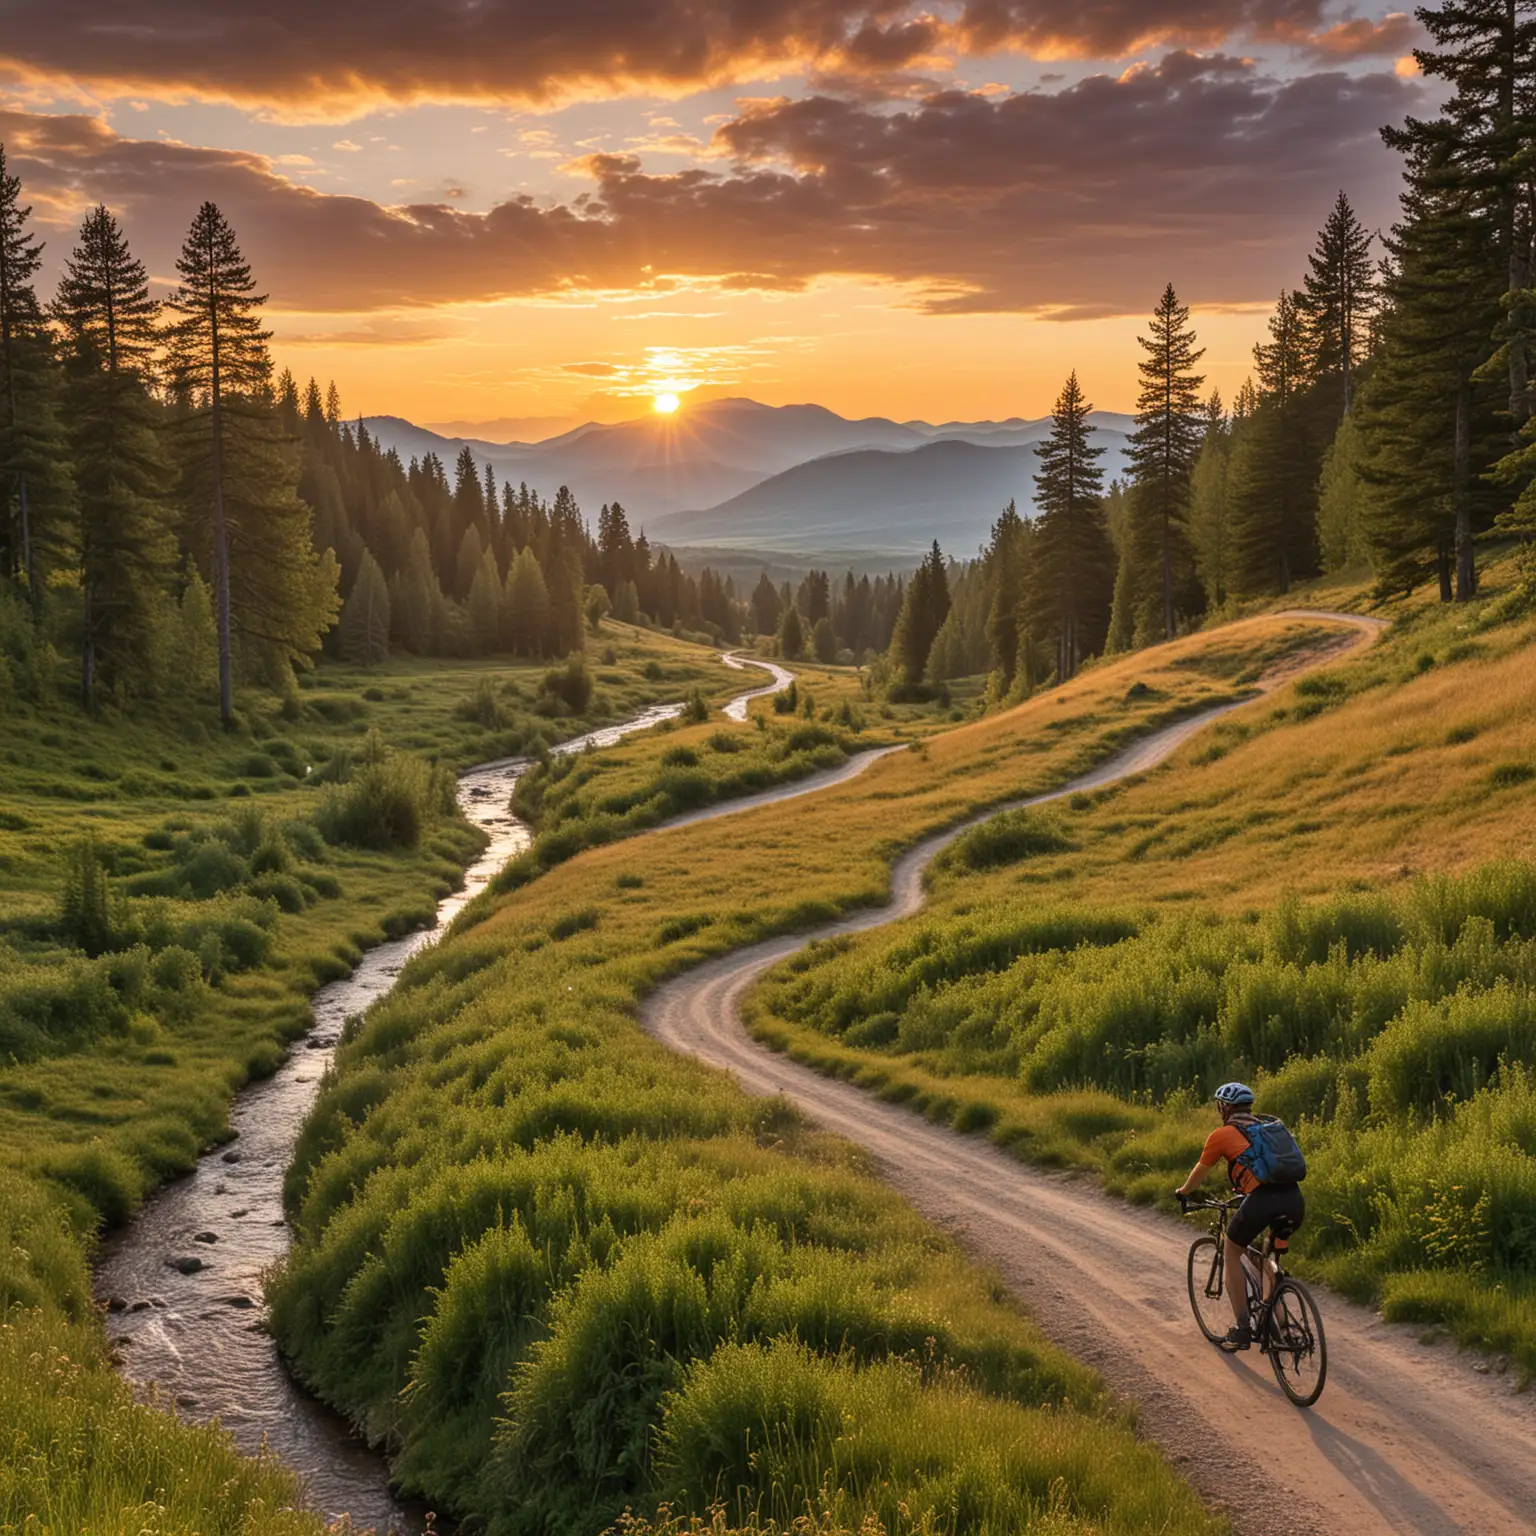 Sunset Cycling Adventure Mountain Landscape with Forest and Winding Trail